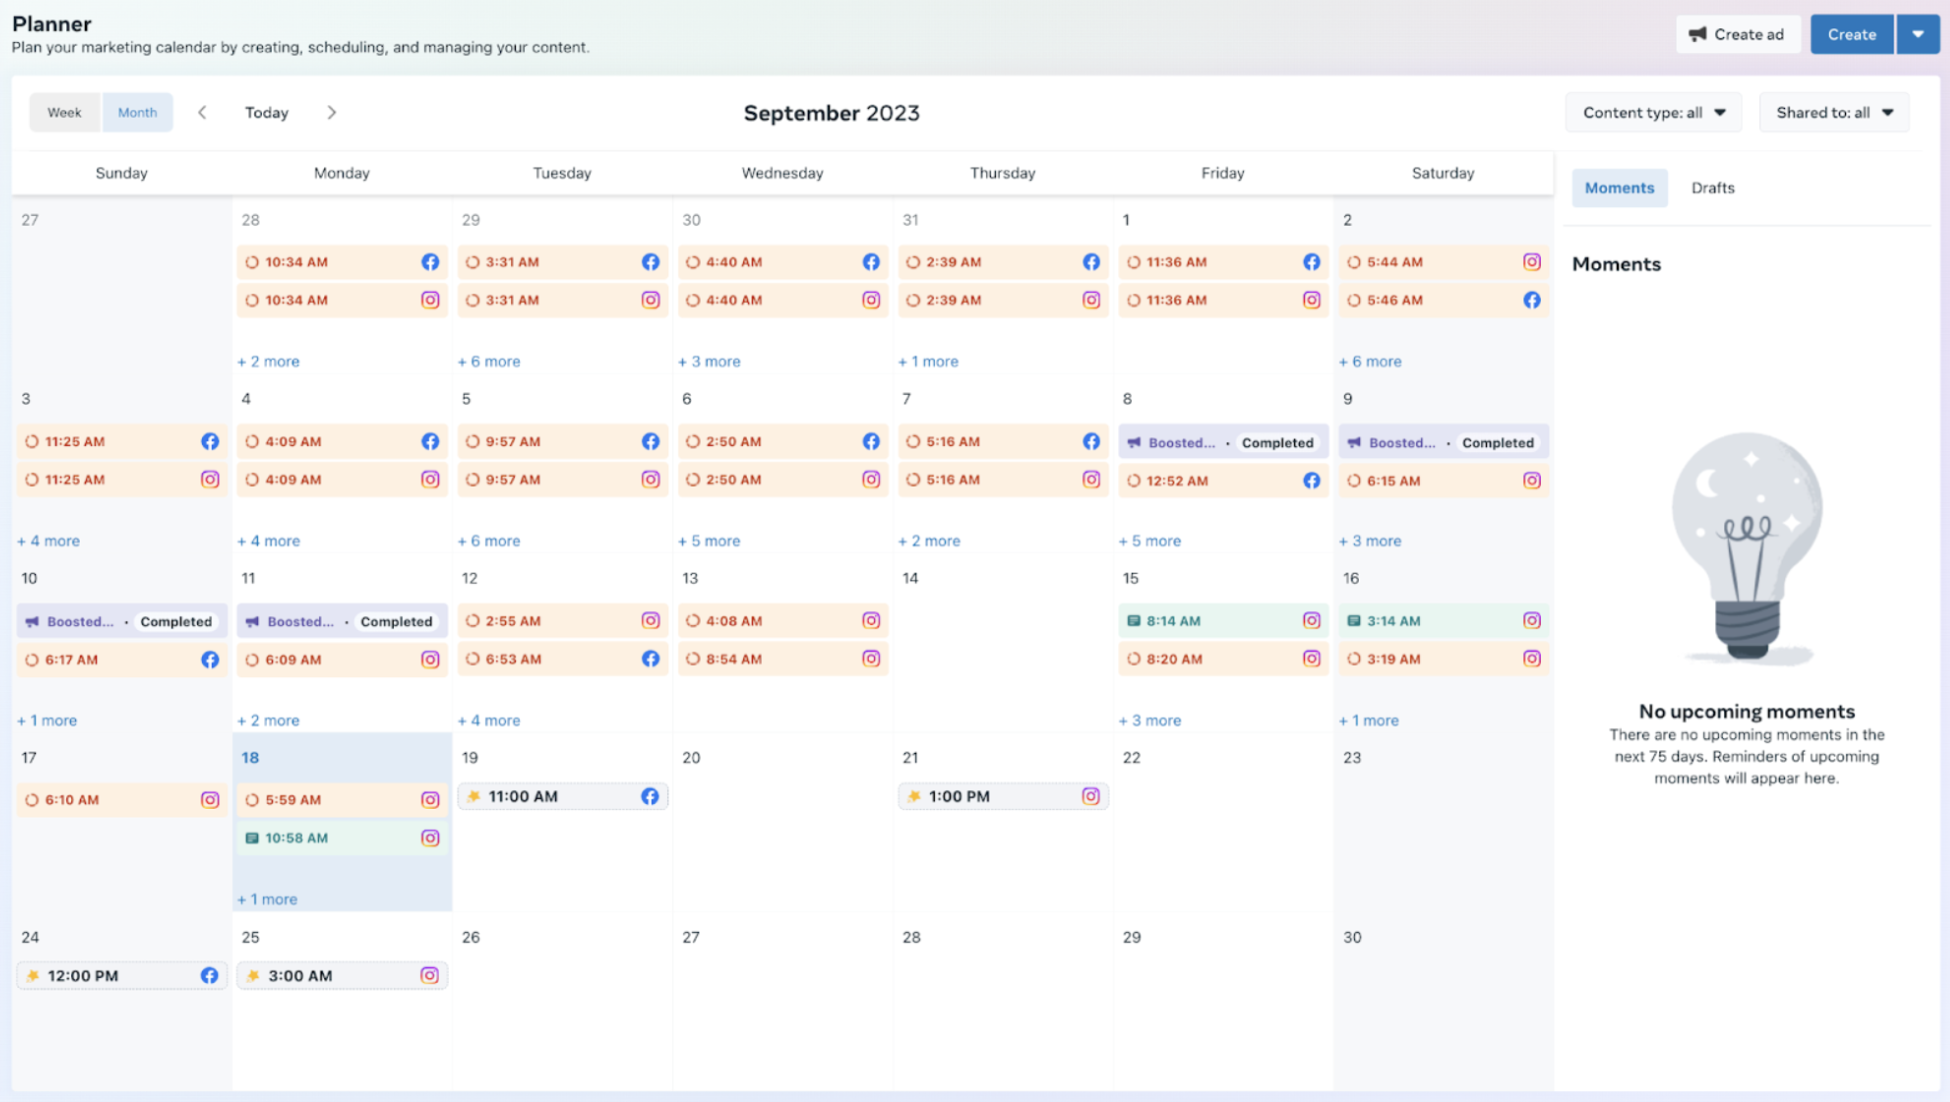 Monthly Planner view in Creator Studio. The image shows content planned for the month of September 2023. 